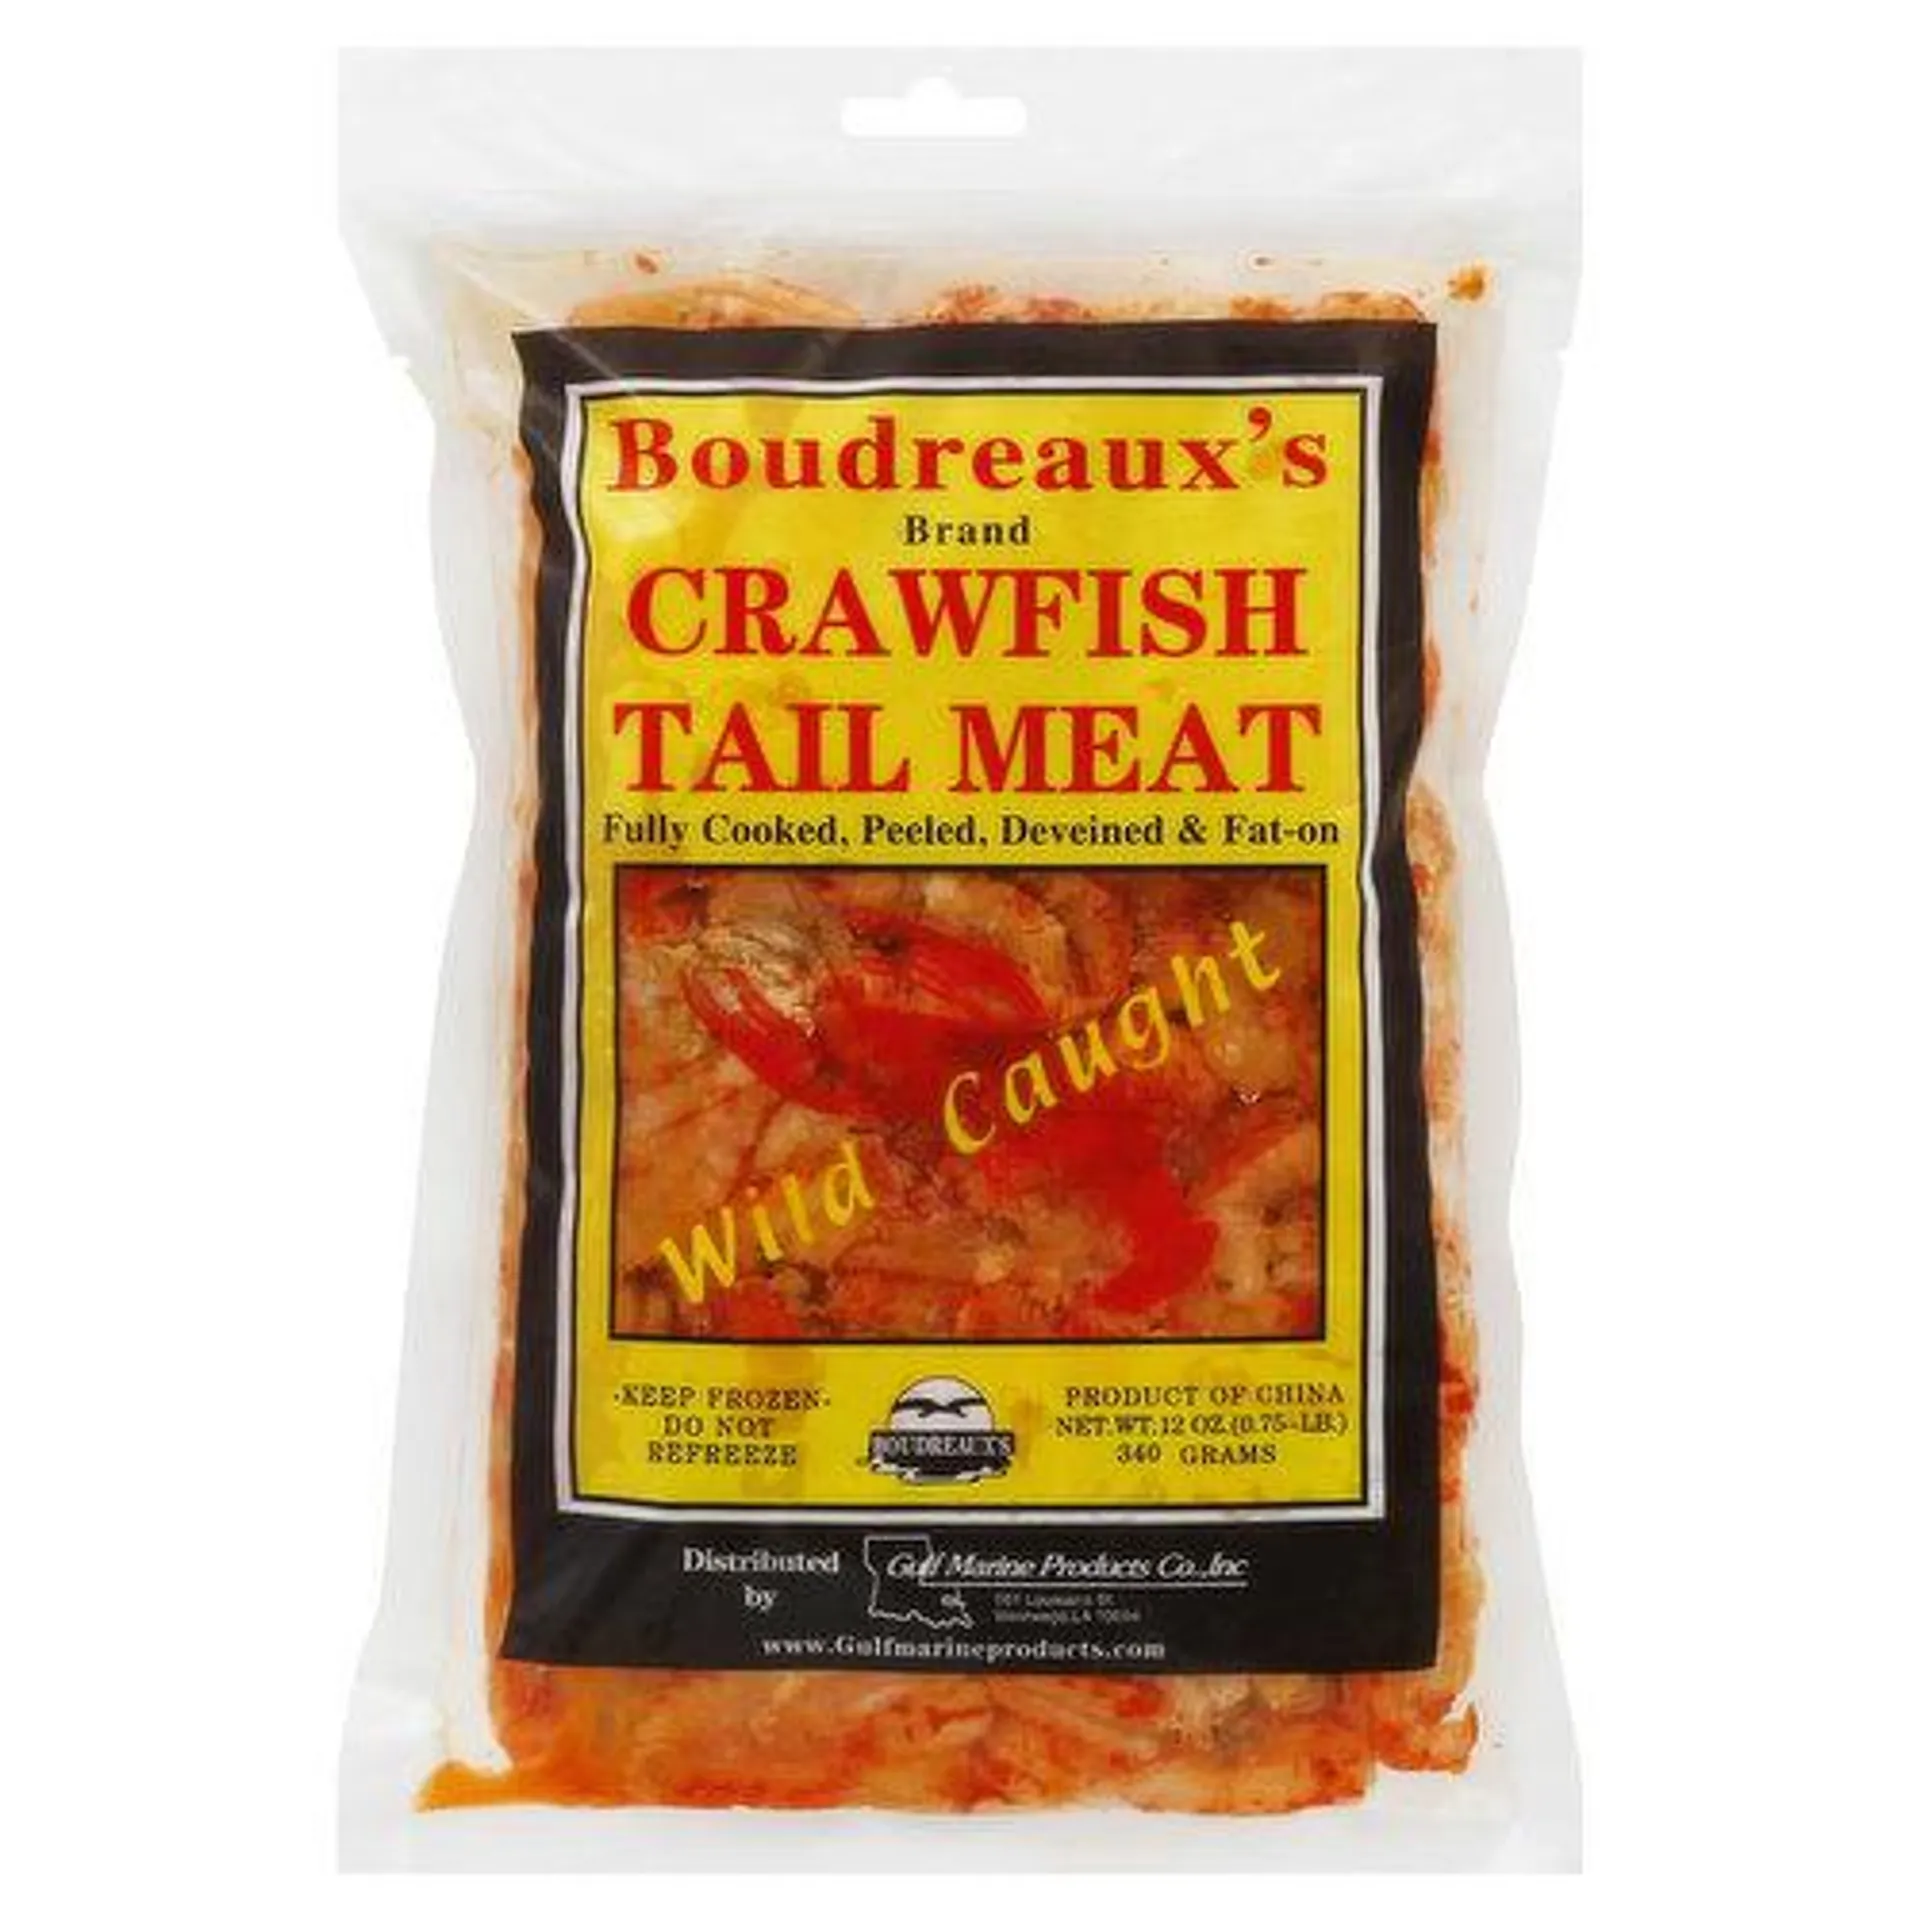 Boudreaux's Crawfish Tail Meat - 12 Ounce